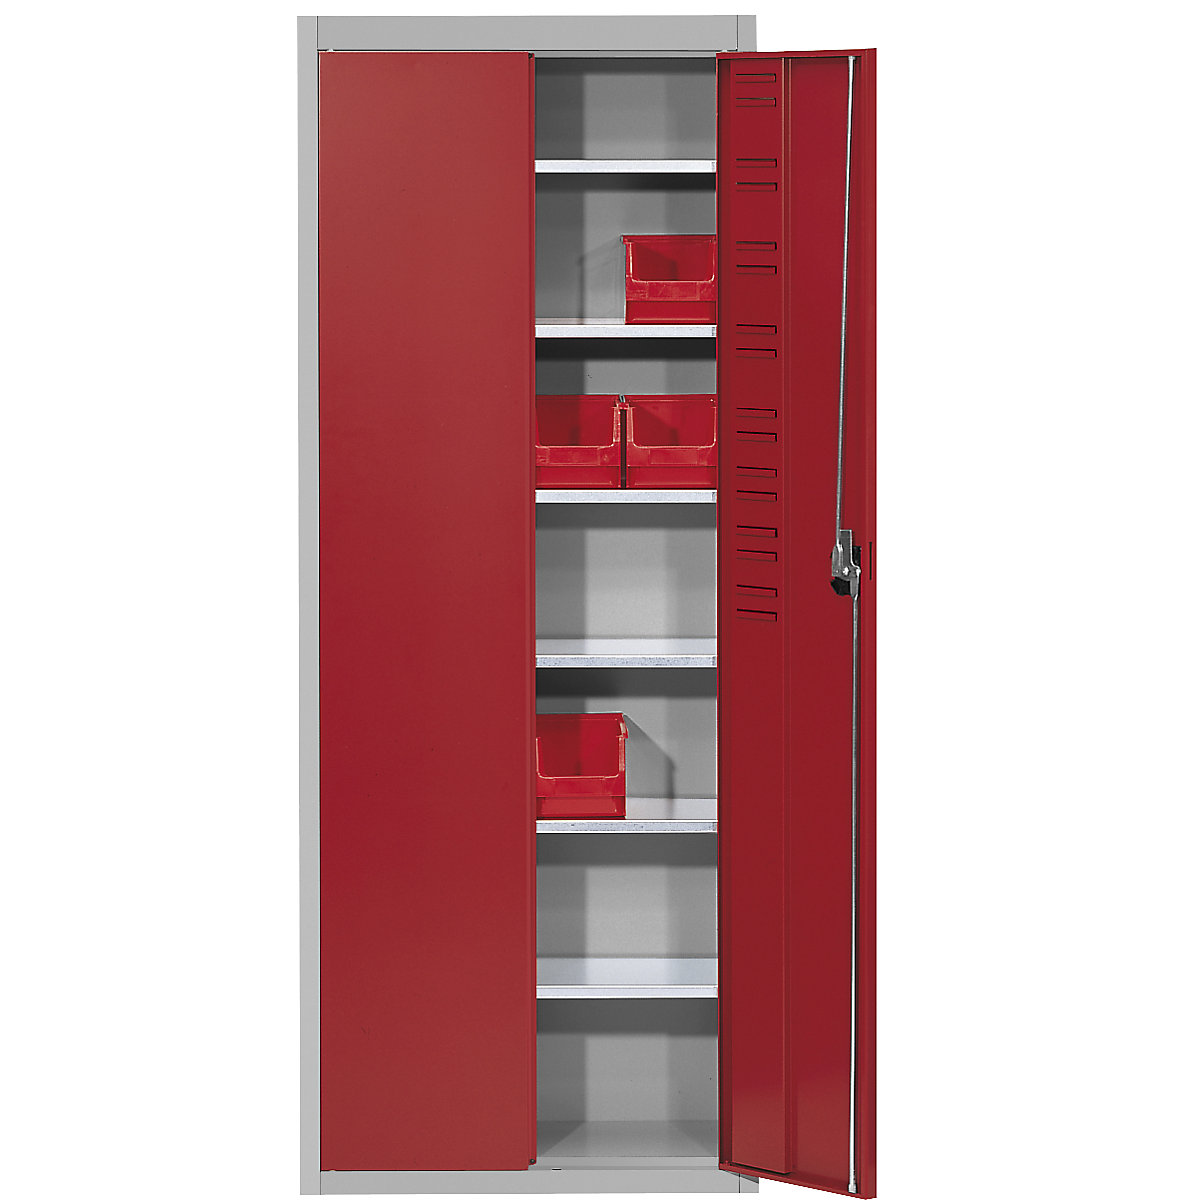 Storage cupboard, without open fronted storage bins – mauser, HxWxD 1740 x 680 x 280 mm, two-colour, grey body, red doors, 3+ items-5